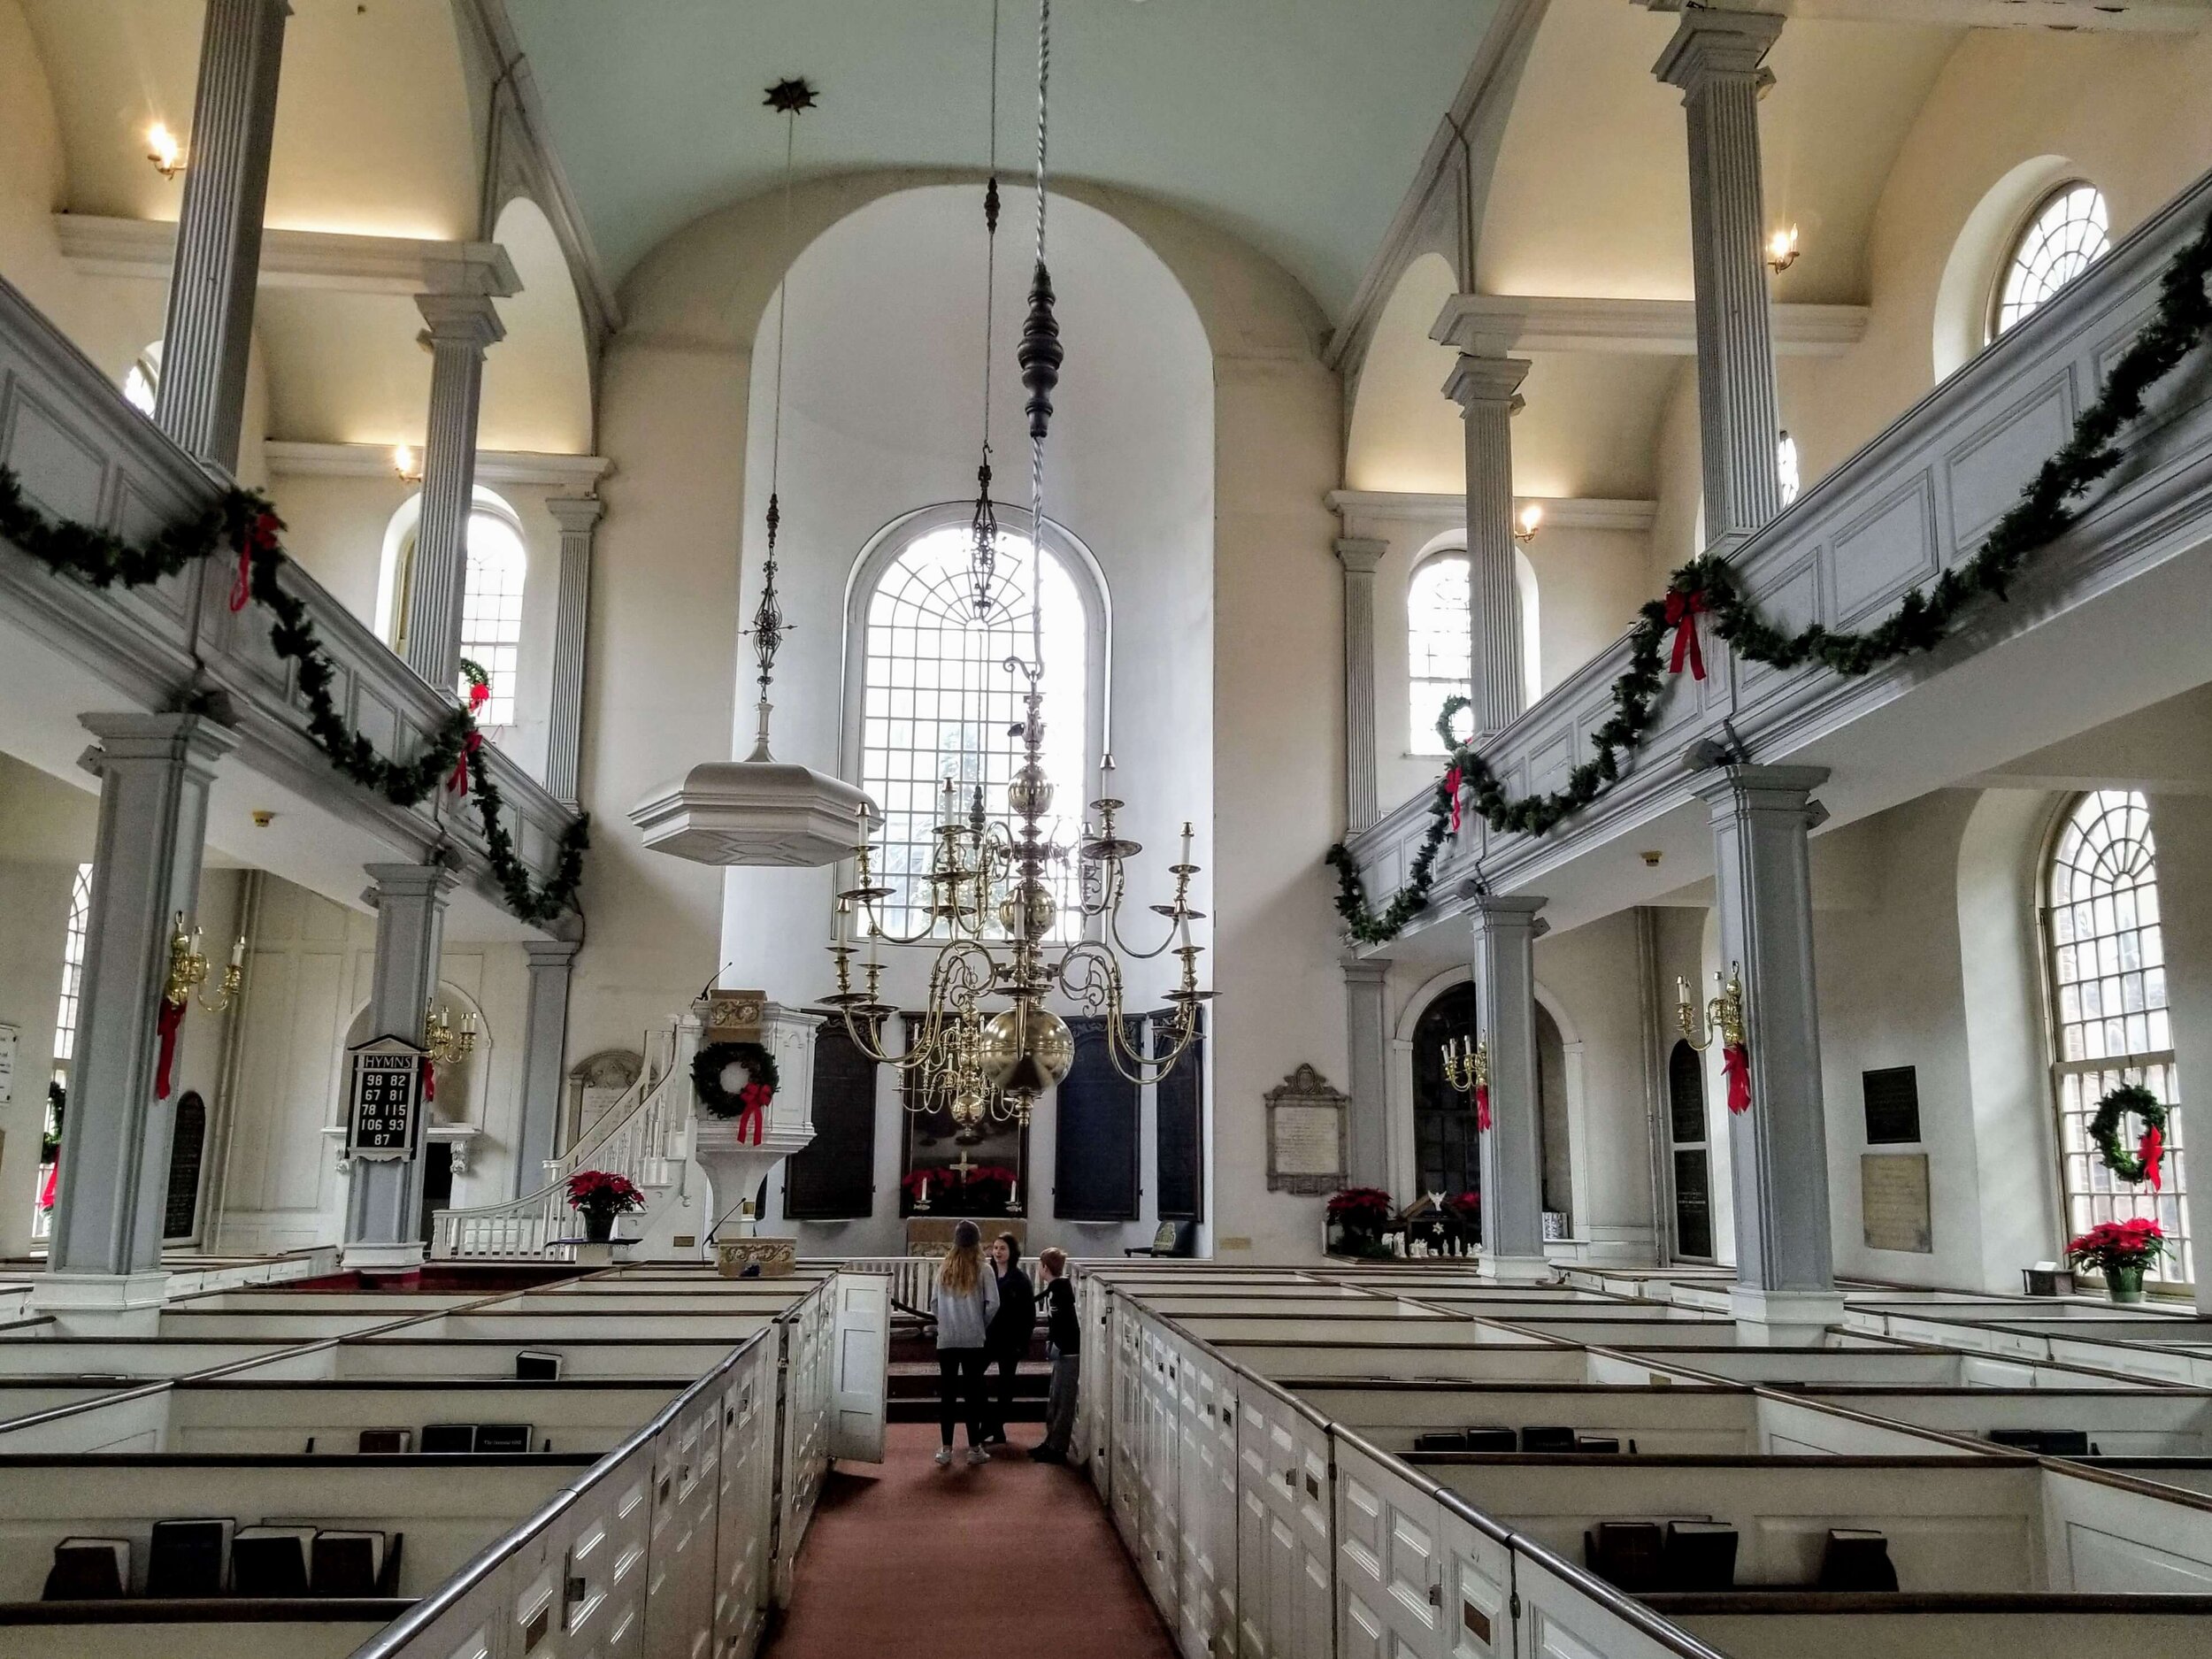  Inside Old North Church, notice we are the only ones so we had the docent all to ourselves 